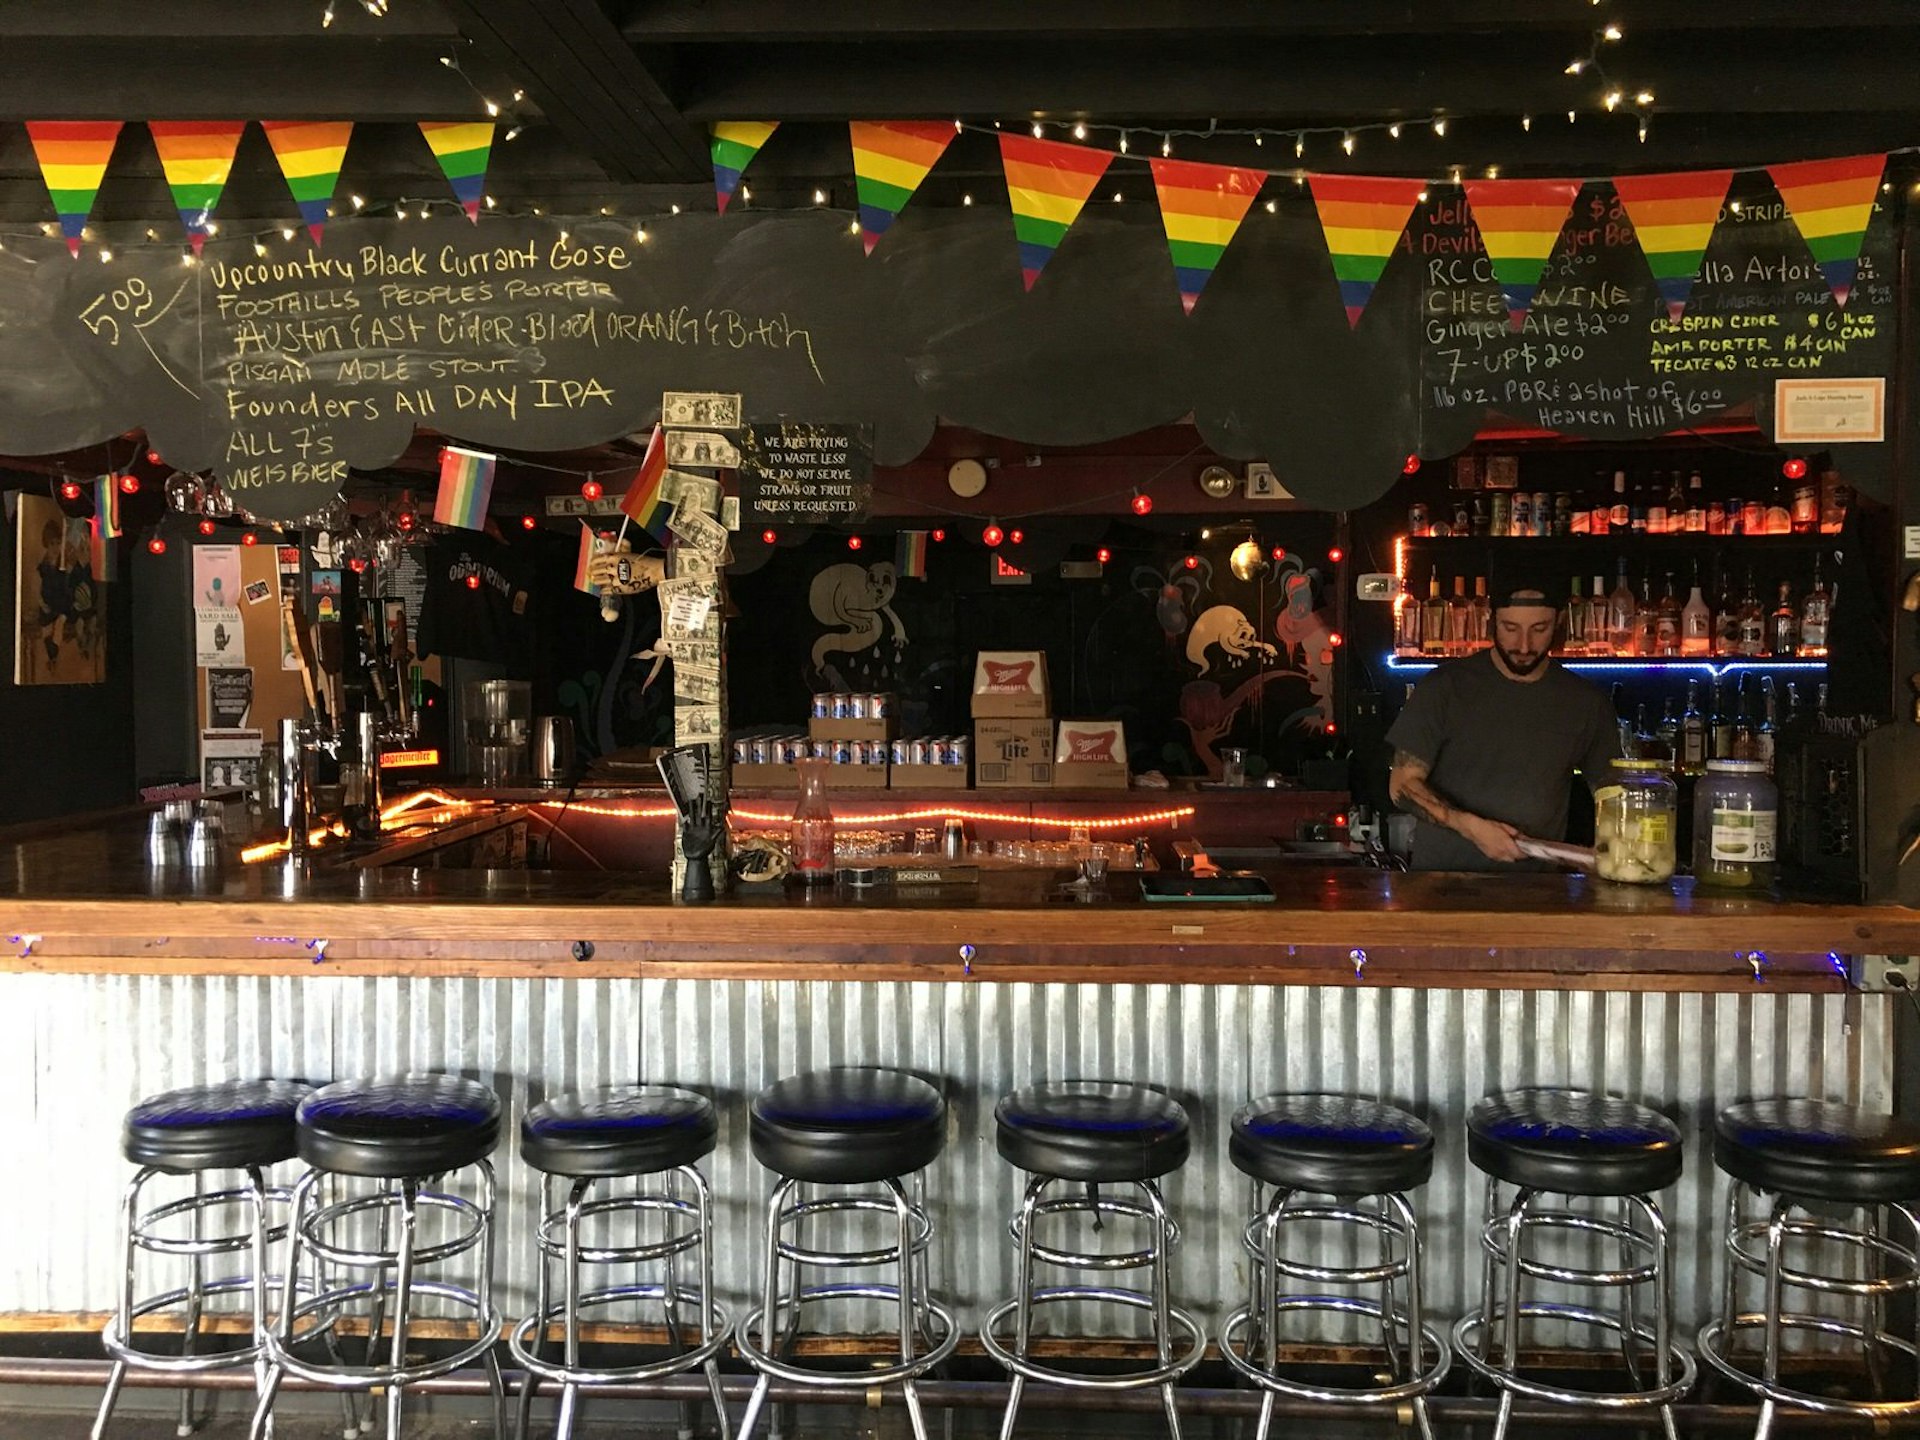 Beneath rainbow-coloured bunting and hand-written chalkboard bar menus, a bartender in a baseball cap and dark shirt busies himself getting ready for patrons to arrive at Asheville music venue The Odditorium